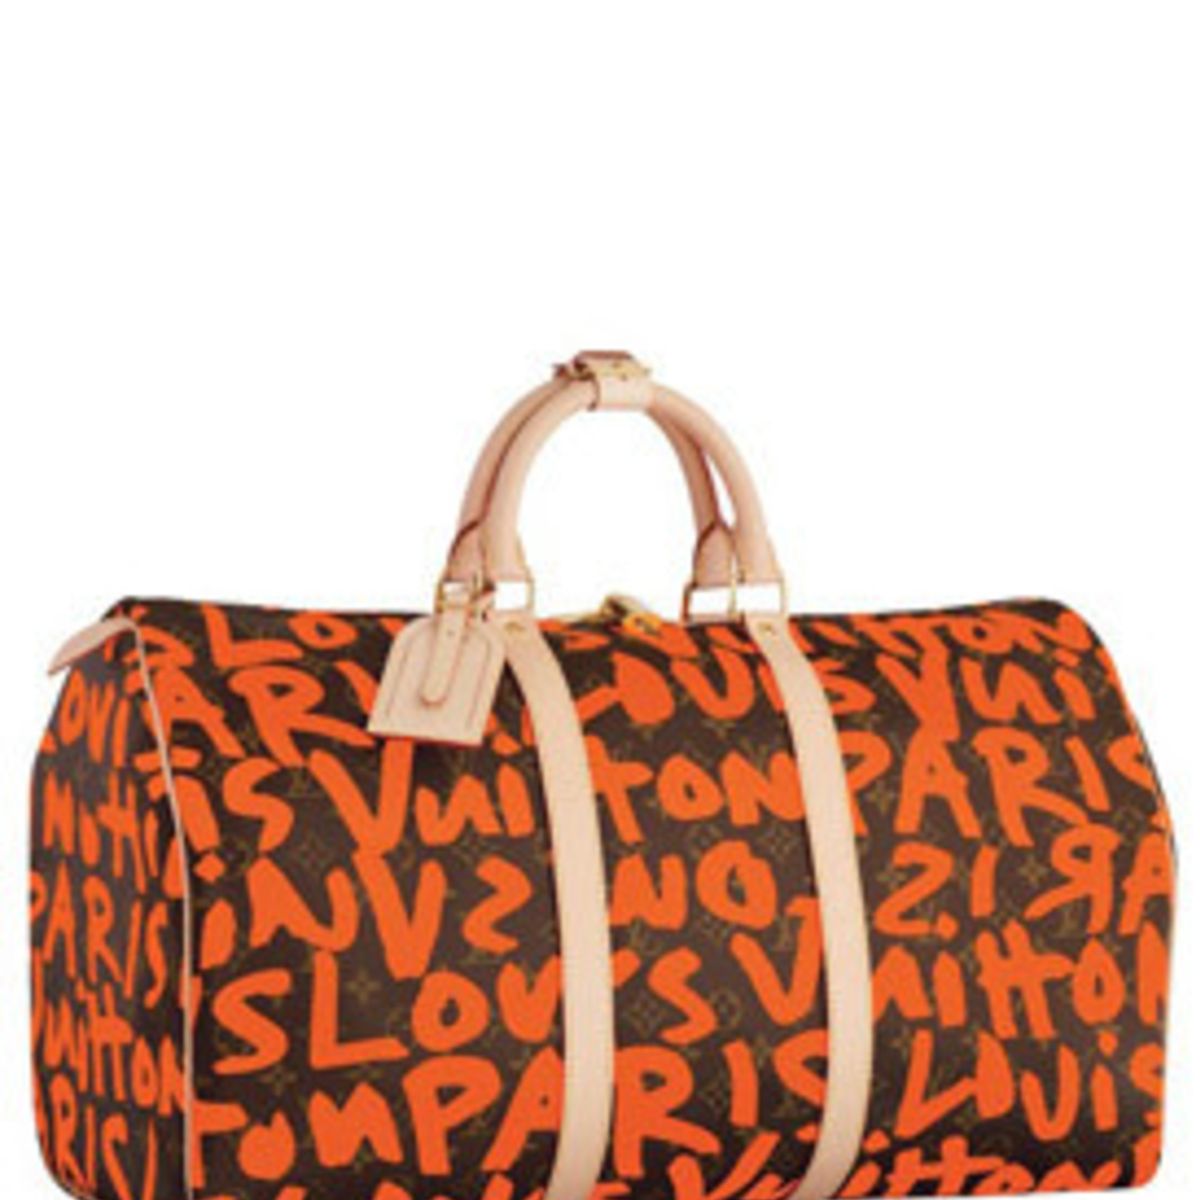 Louis Vuitton's limited editions inspired by Stephen Sprouse